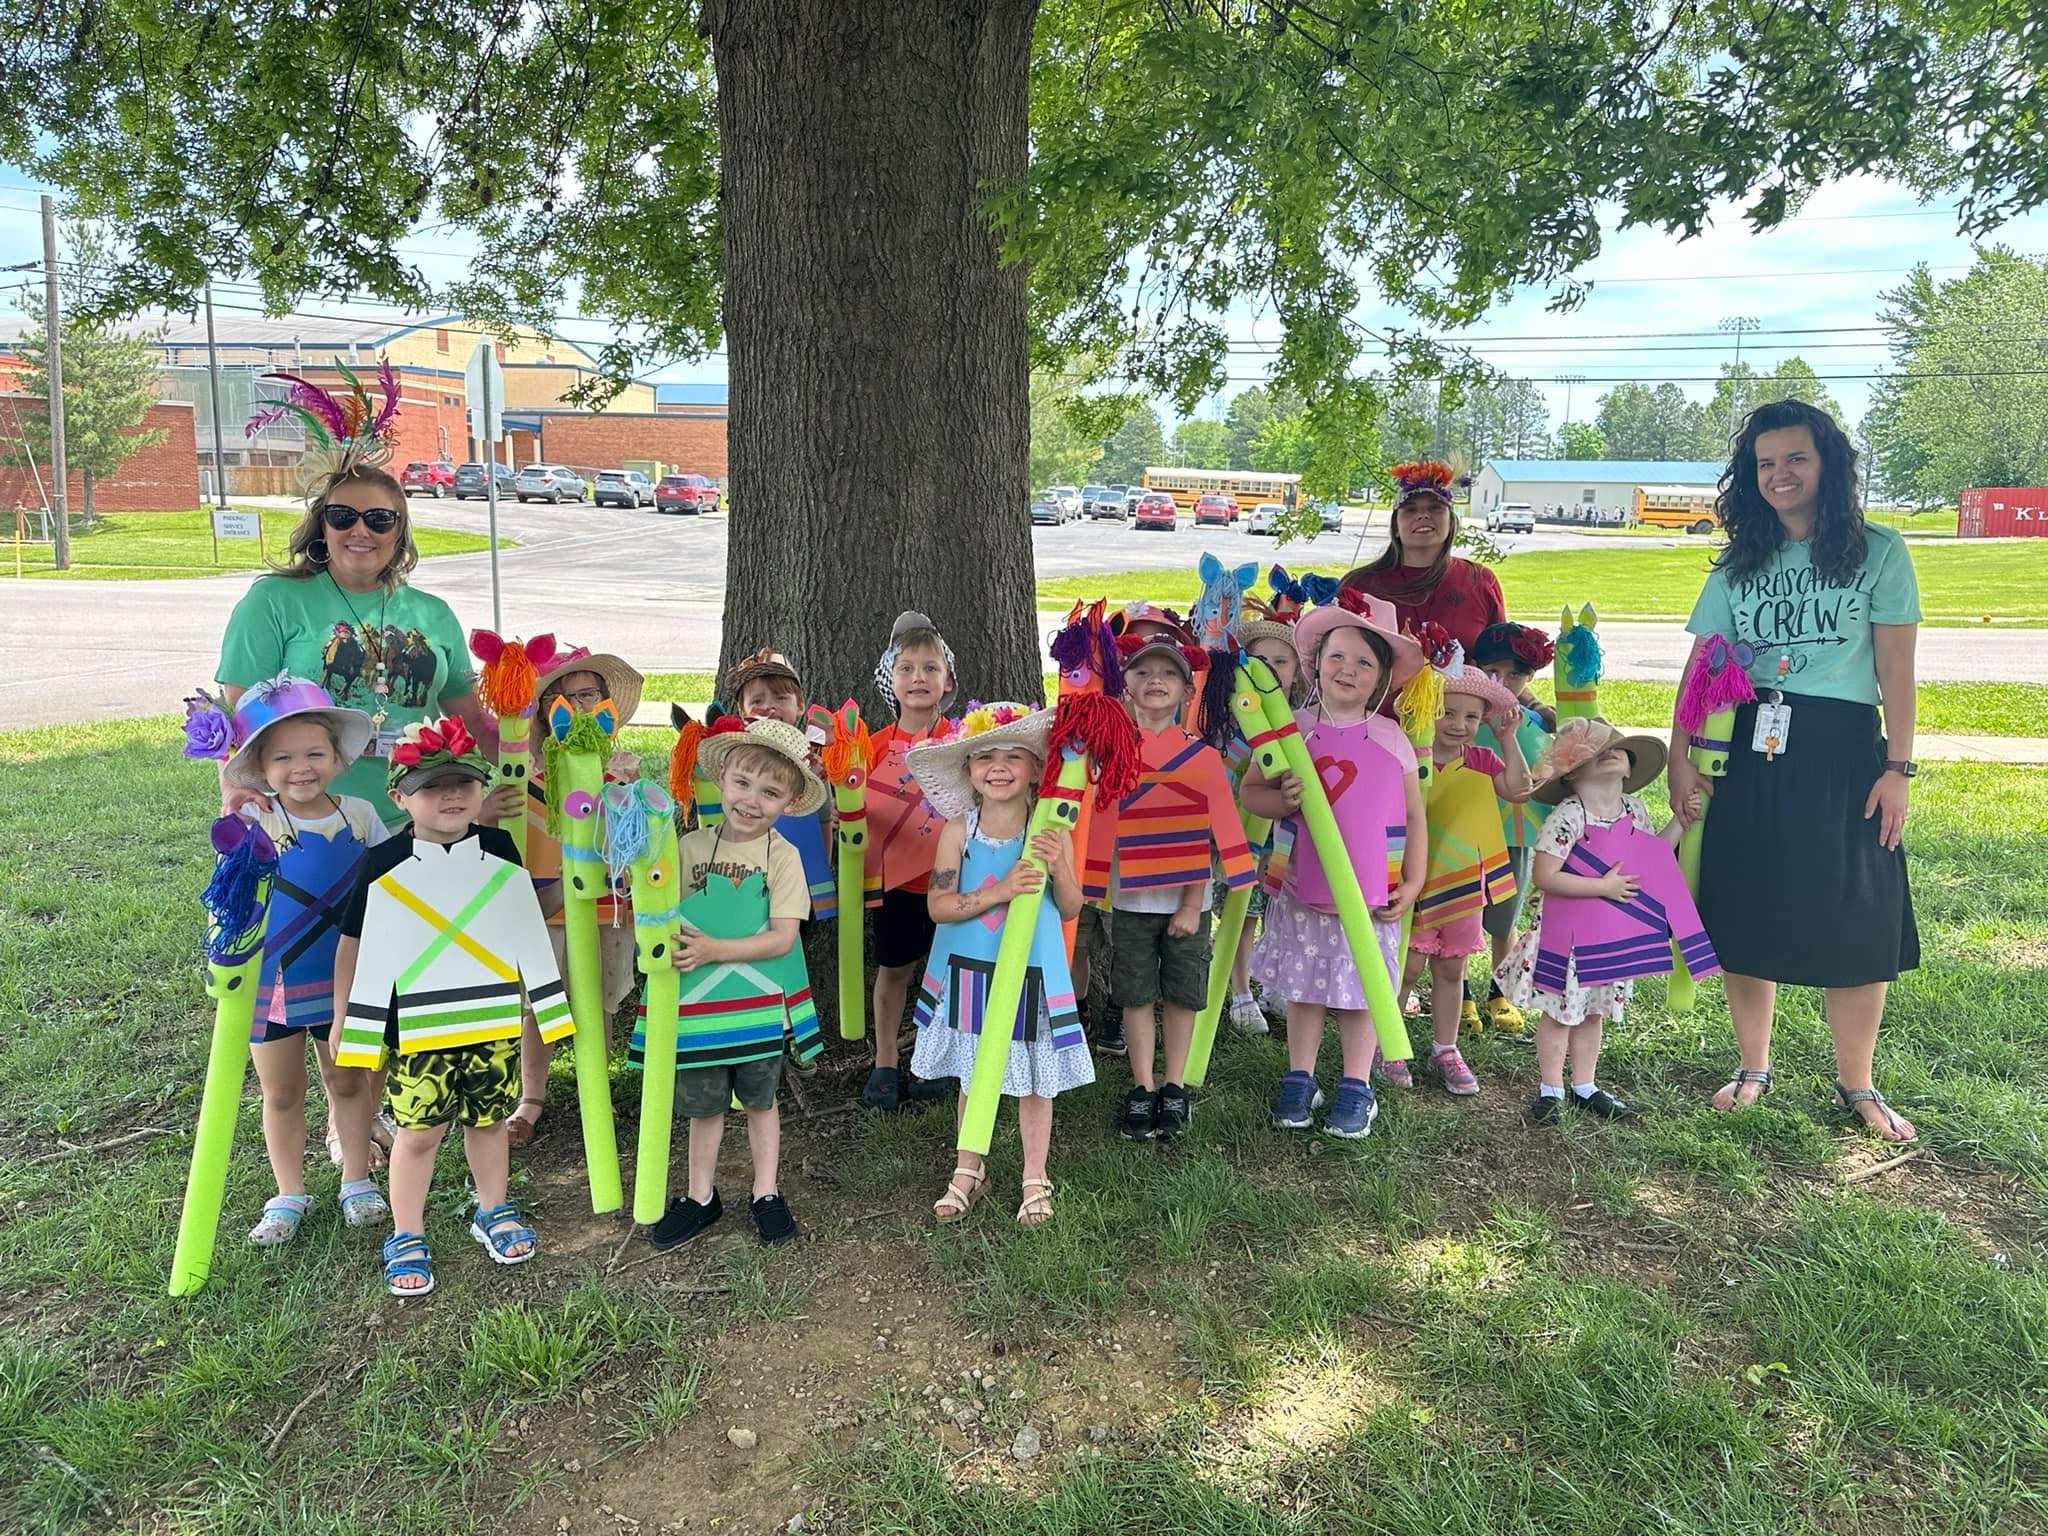 preschoolers and teachers outside in derby hats with pool noodle "race horses"